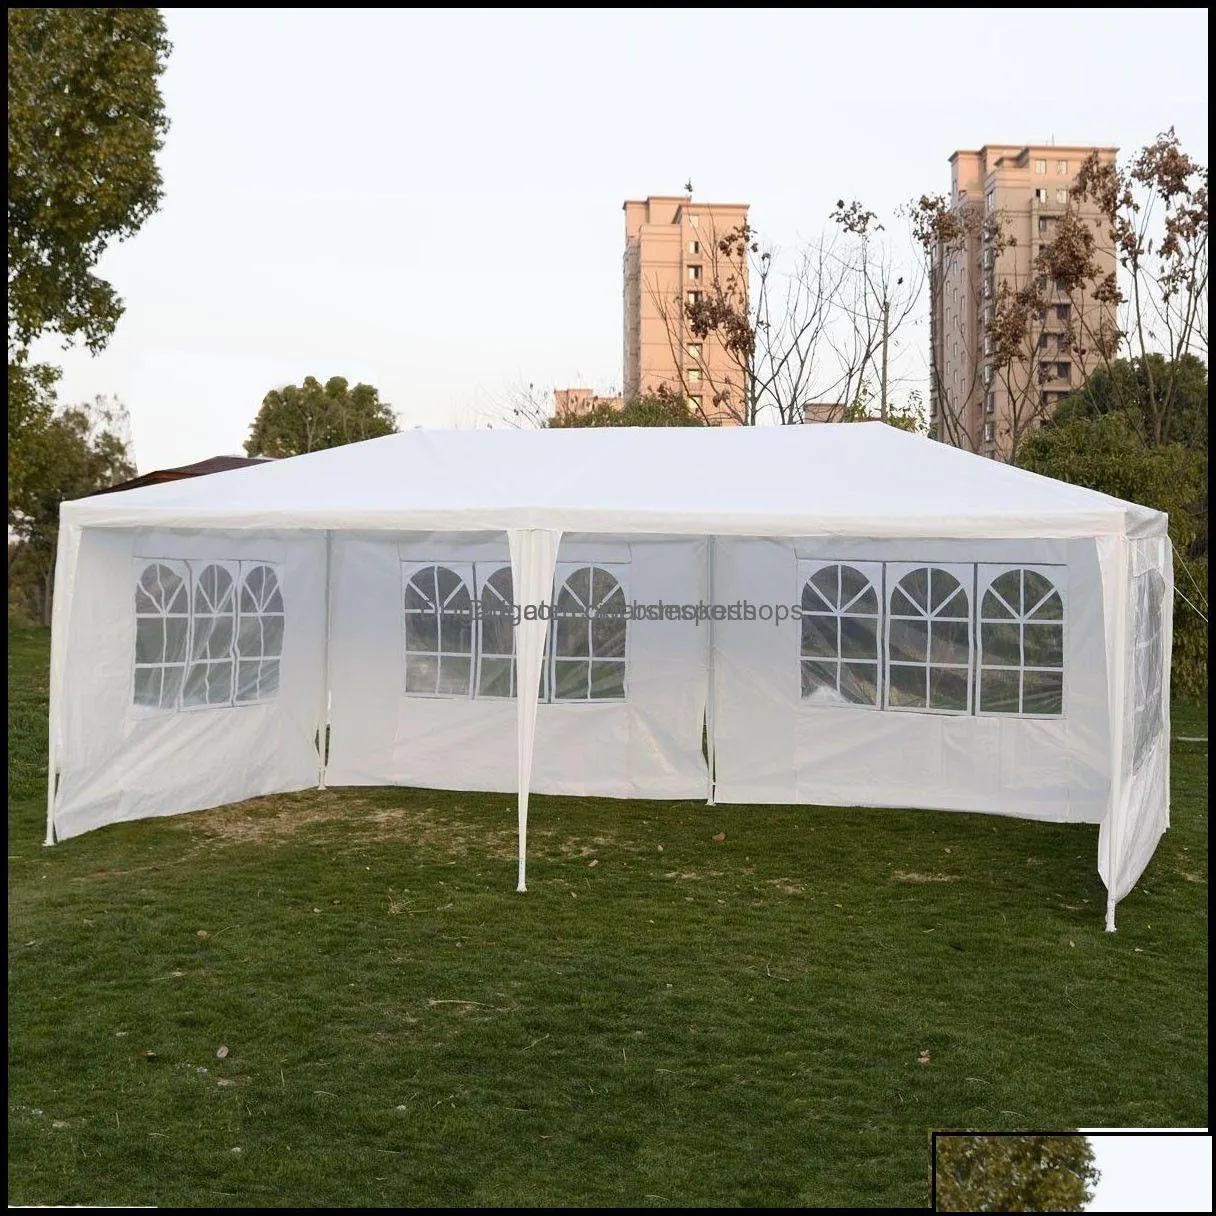 Shade Garden Buildings Patio Lawn & Home Outdoor 3x9M Canopy Party Wedding Tent Gazebo Pavilion Cater Events Sidewall Drop Delivery